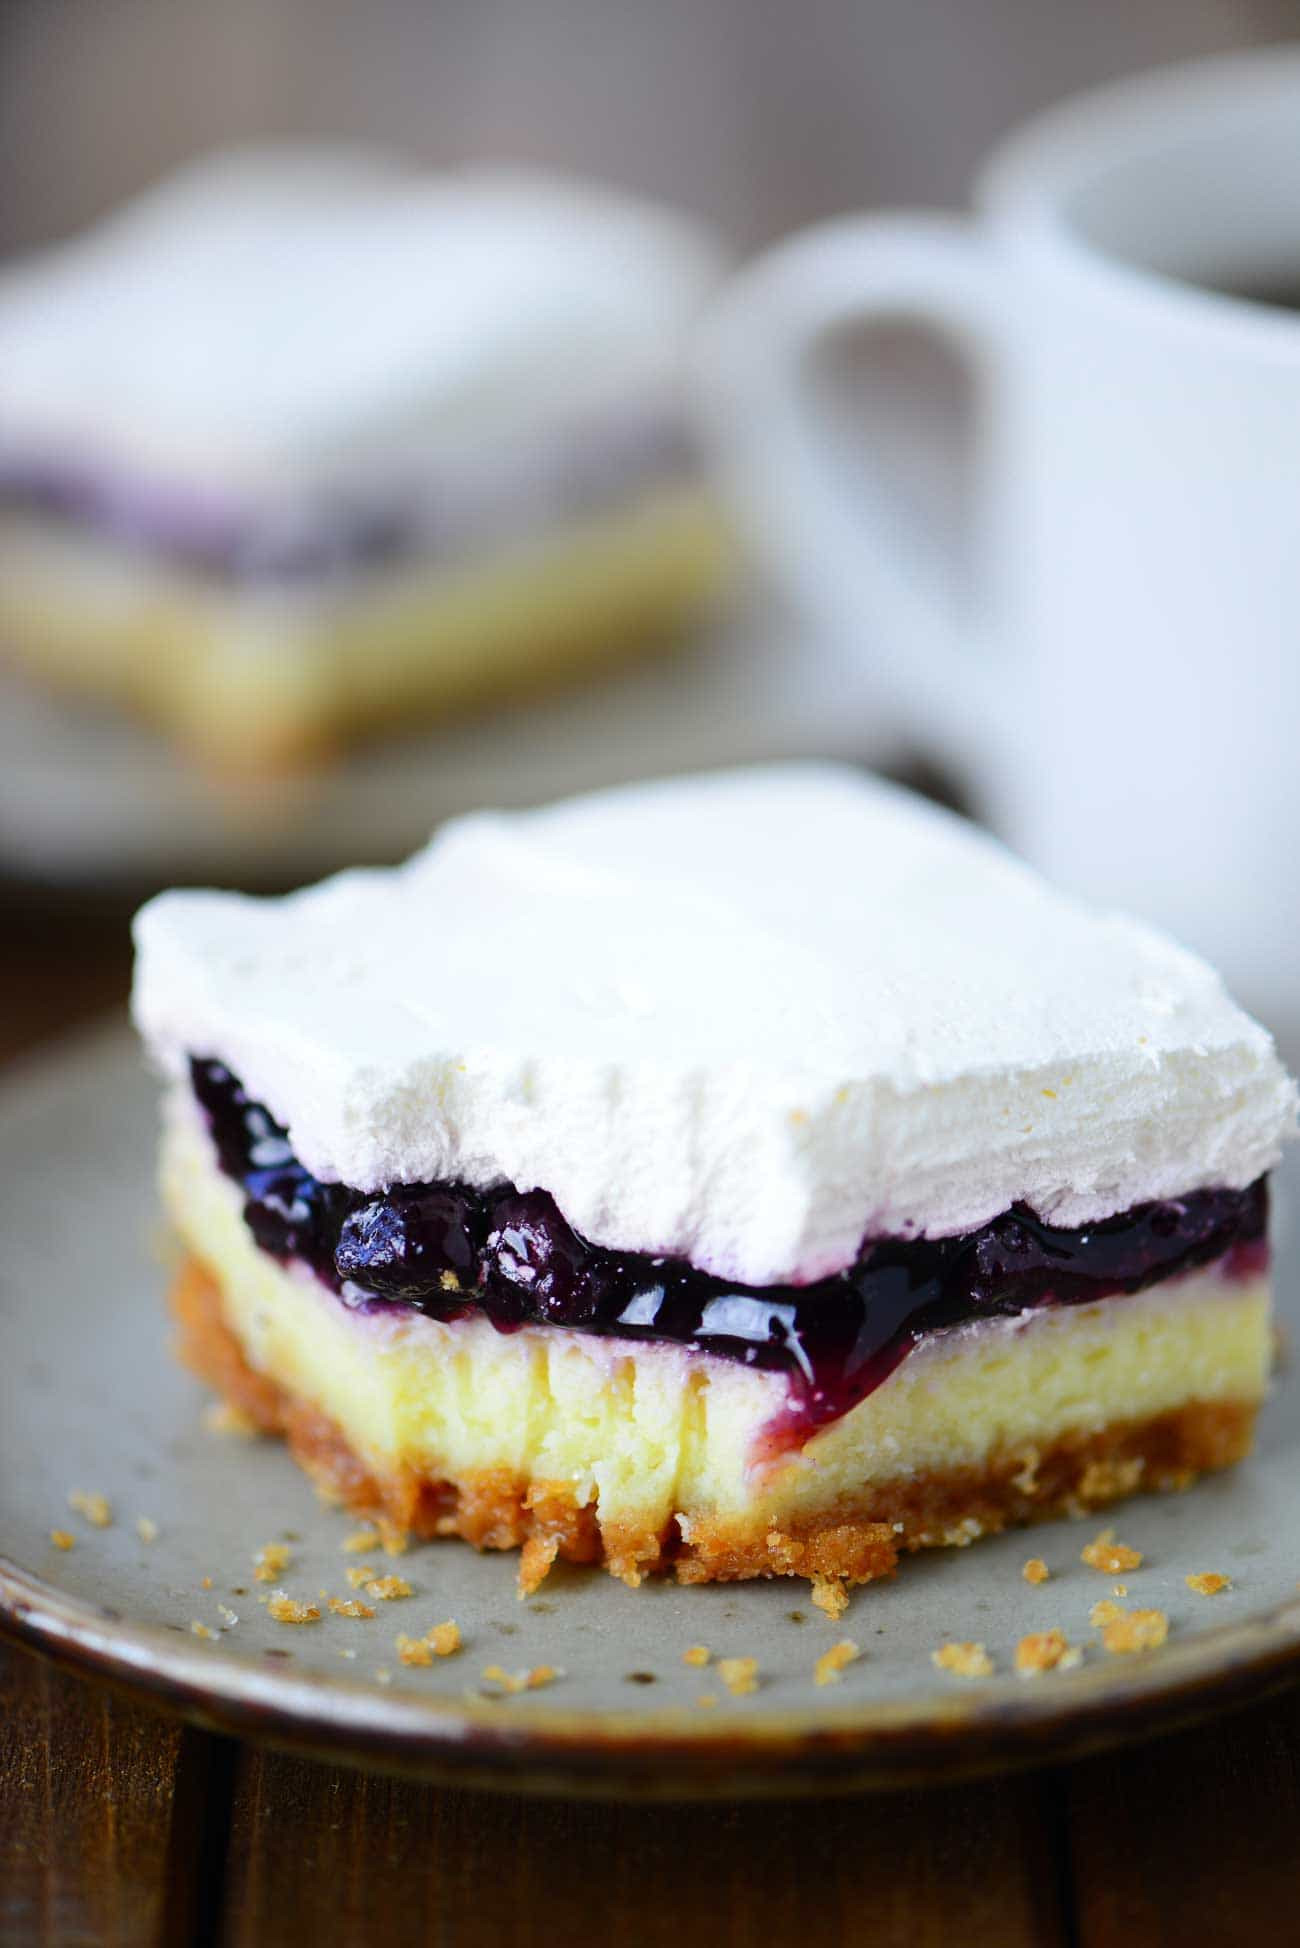 Blueberry Dessert Recipes With Cream Cheese
 Blueberry Cheesecake Dessert Recipe